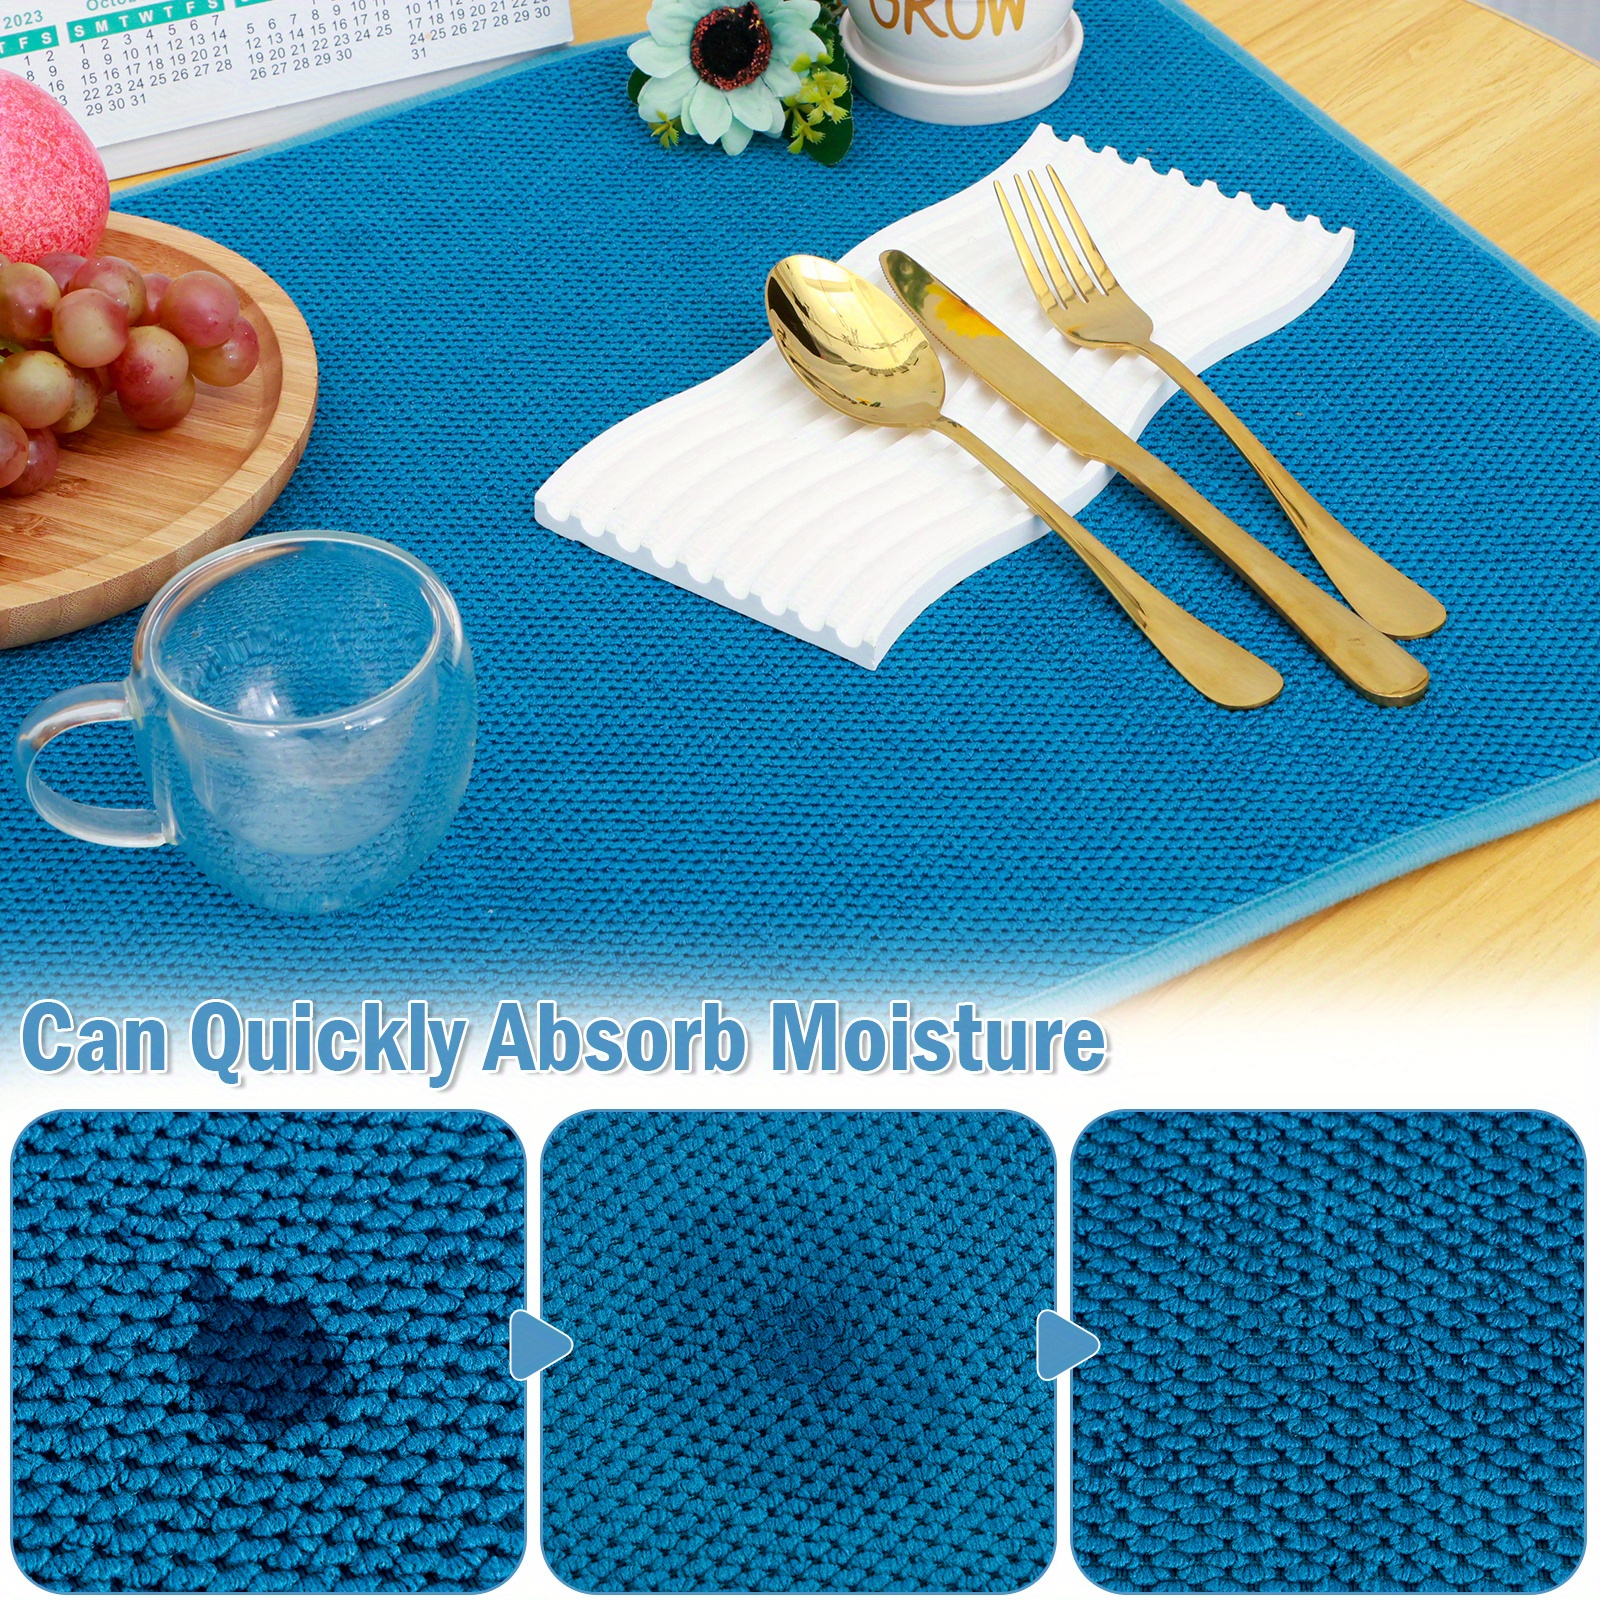 Dish Drying Mat for Kitchen Counter - 15 x 20 inch Microfiber